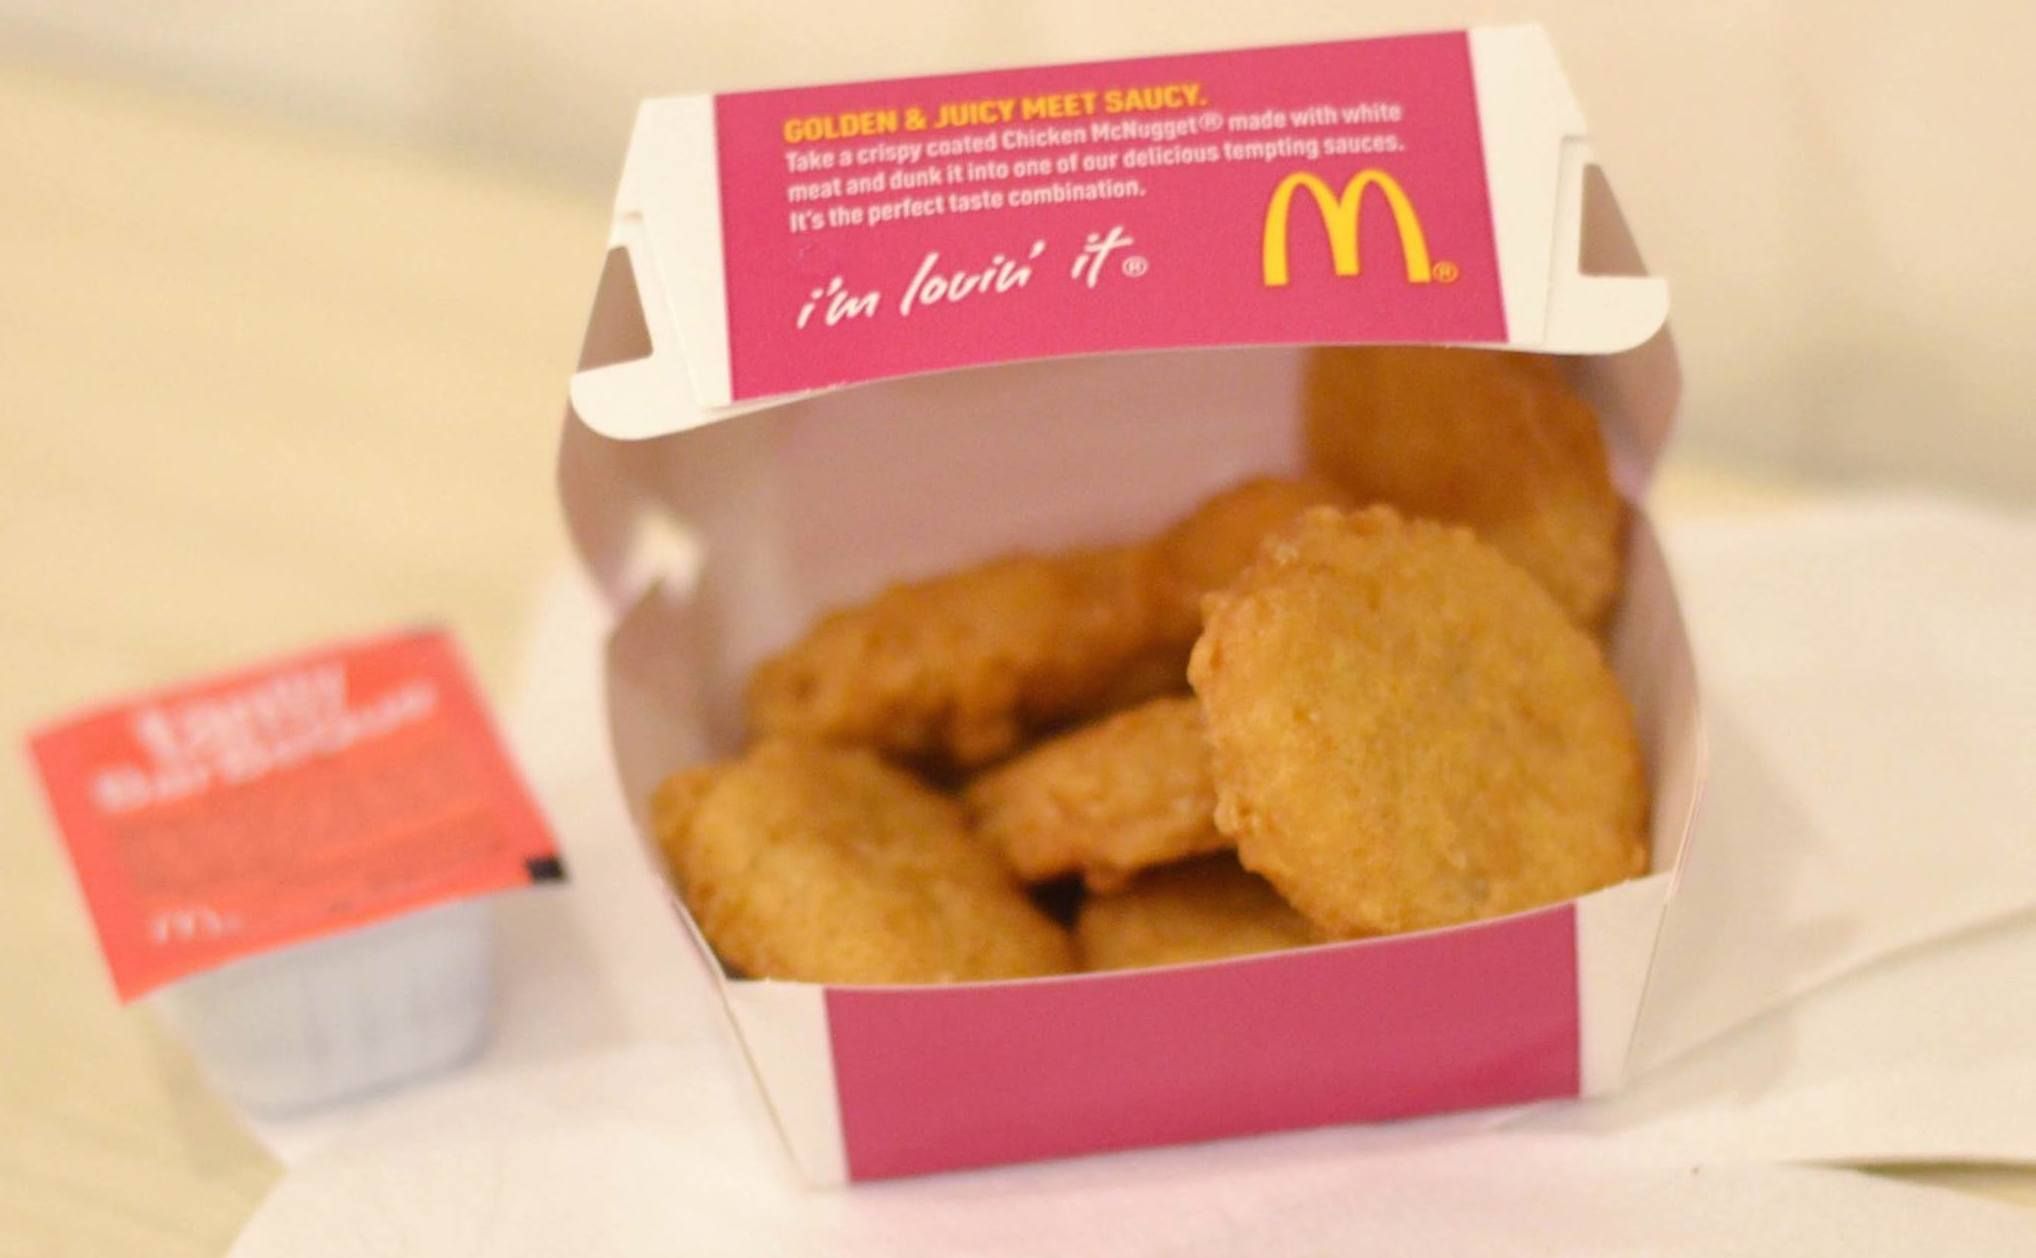 mcdonalds nugget happy meal